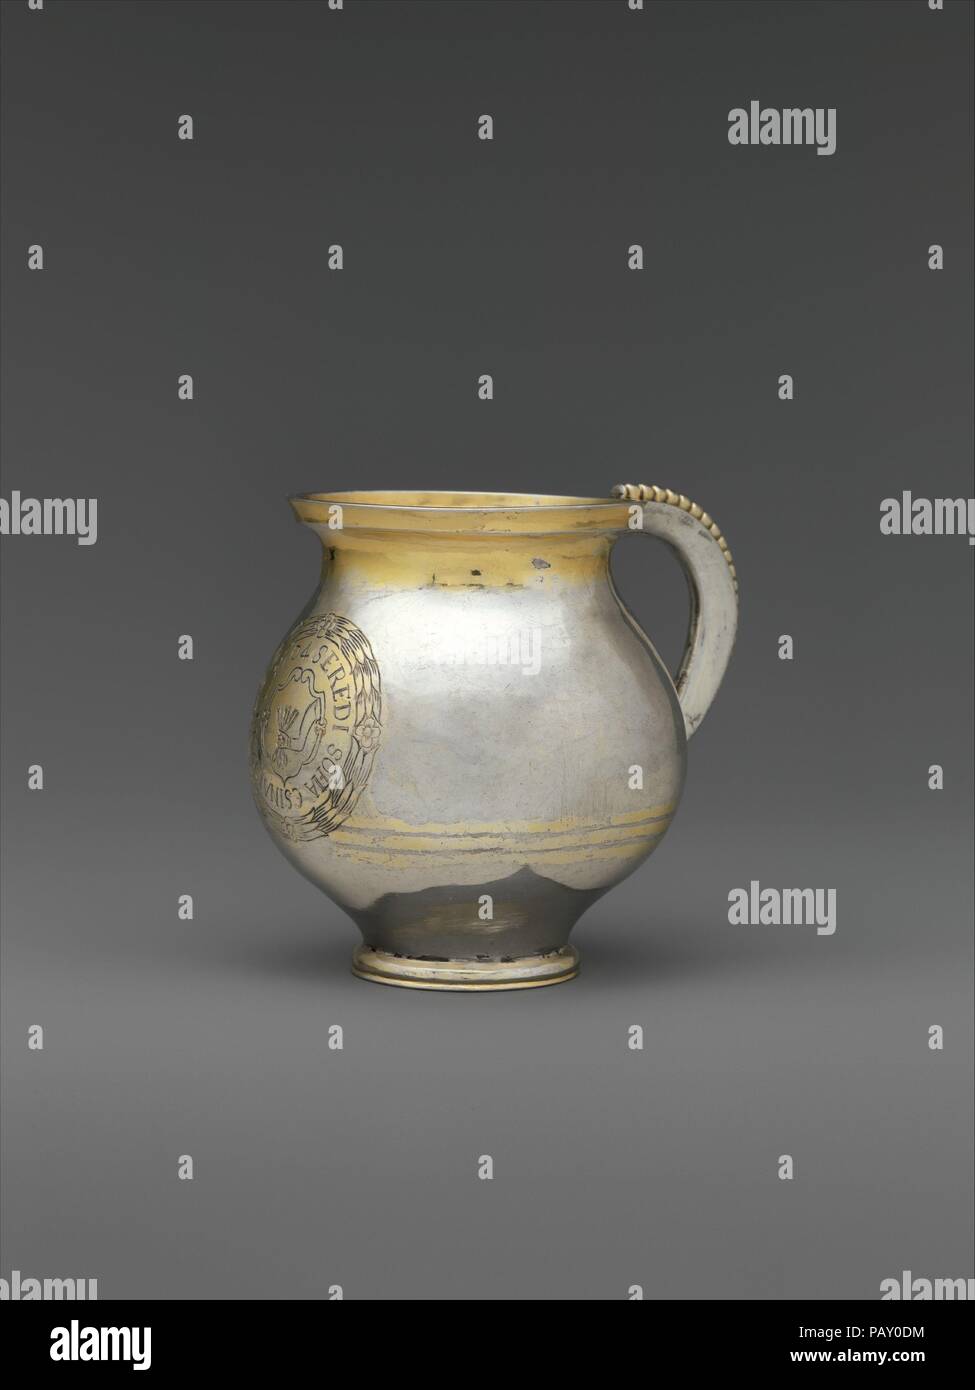 Mug. Culture: Hungarian, Transylvania. Dimensions: Overall: 3 7/8 x 2 15/16 in. (9.8 x 7.4 cm). Date: 1704.  This mug is engraved with the coat of arms of the Serédi family and an inscription that states Sofia Serédi commissioned the piece in 1704. She was married to István Andrássy (1650-1725), a general under Francis II Rákóczi (1676-1735), who fought in an uprising against the Habsburg emperor from 1703 to 1711. Several pieces from the Salgo Collection were once part of the Andrássy treasury.  Literature  <i>European Silver</i>. Sale cat., Sotheby's, Geneva, May 8, 1989, p. 71, no. 205.  Ju Stock Photo